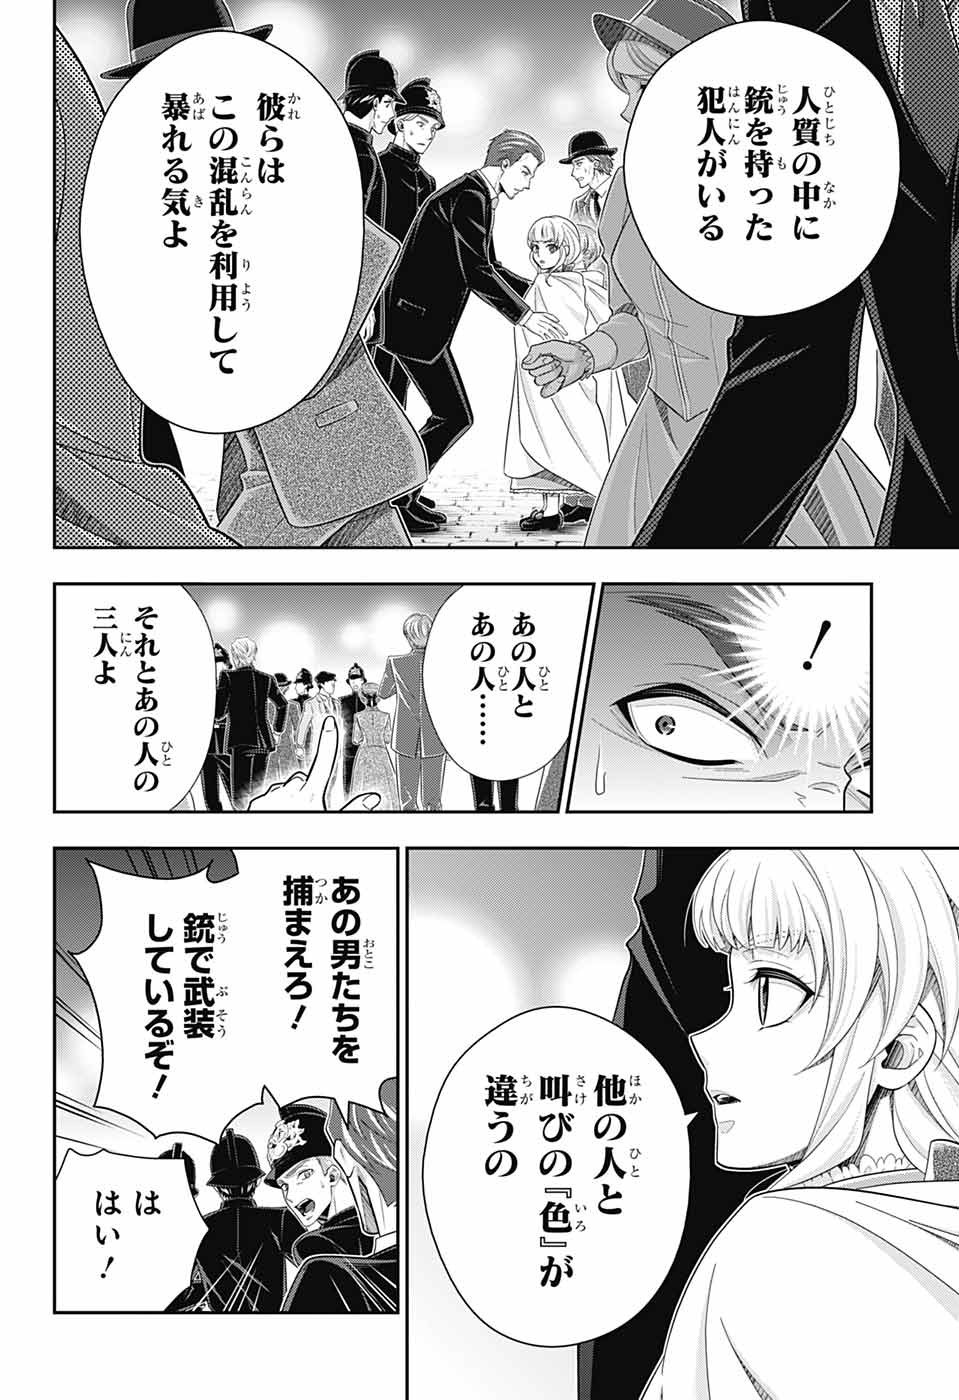 Yuukoku no Moriarty: The Remains - Chapter 08 - Page 2